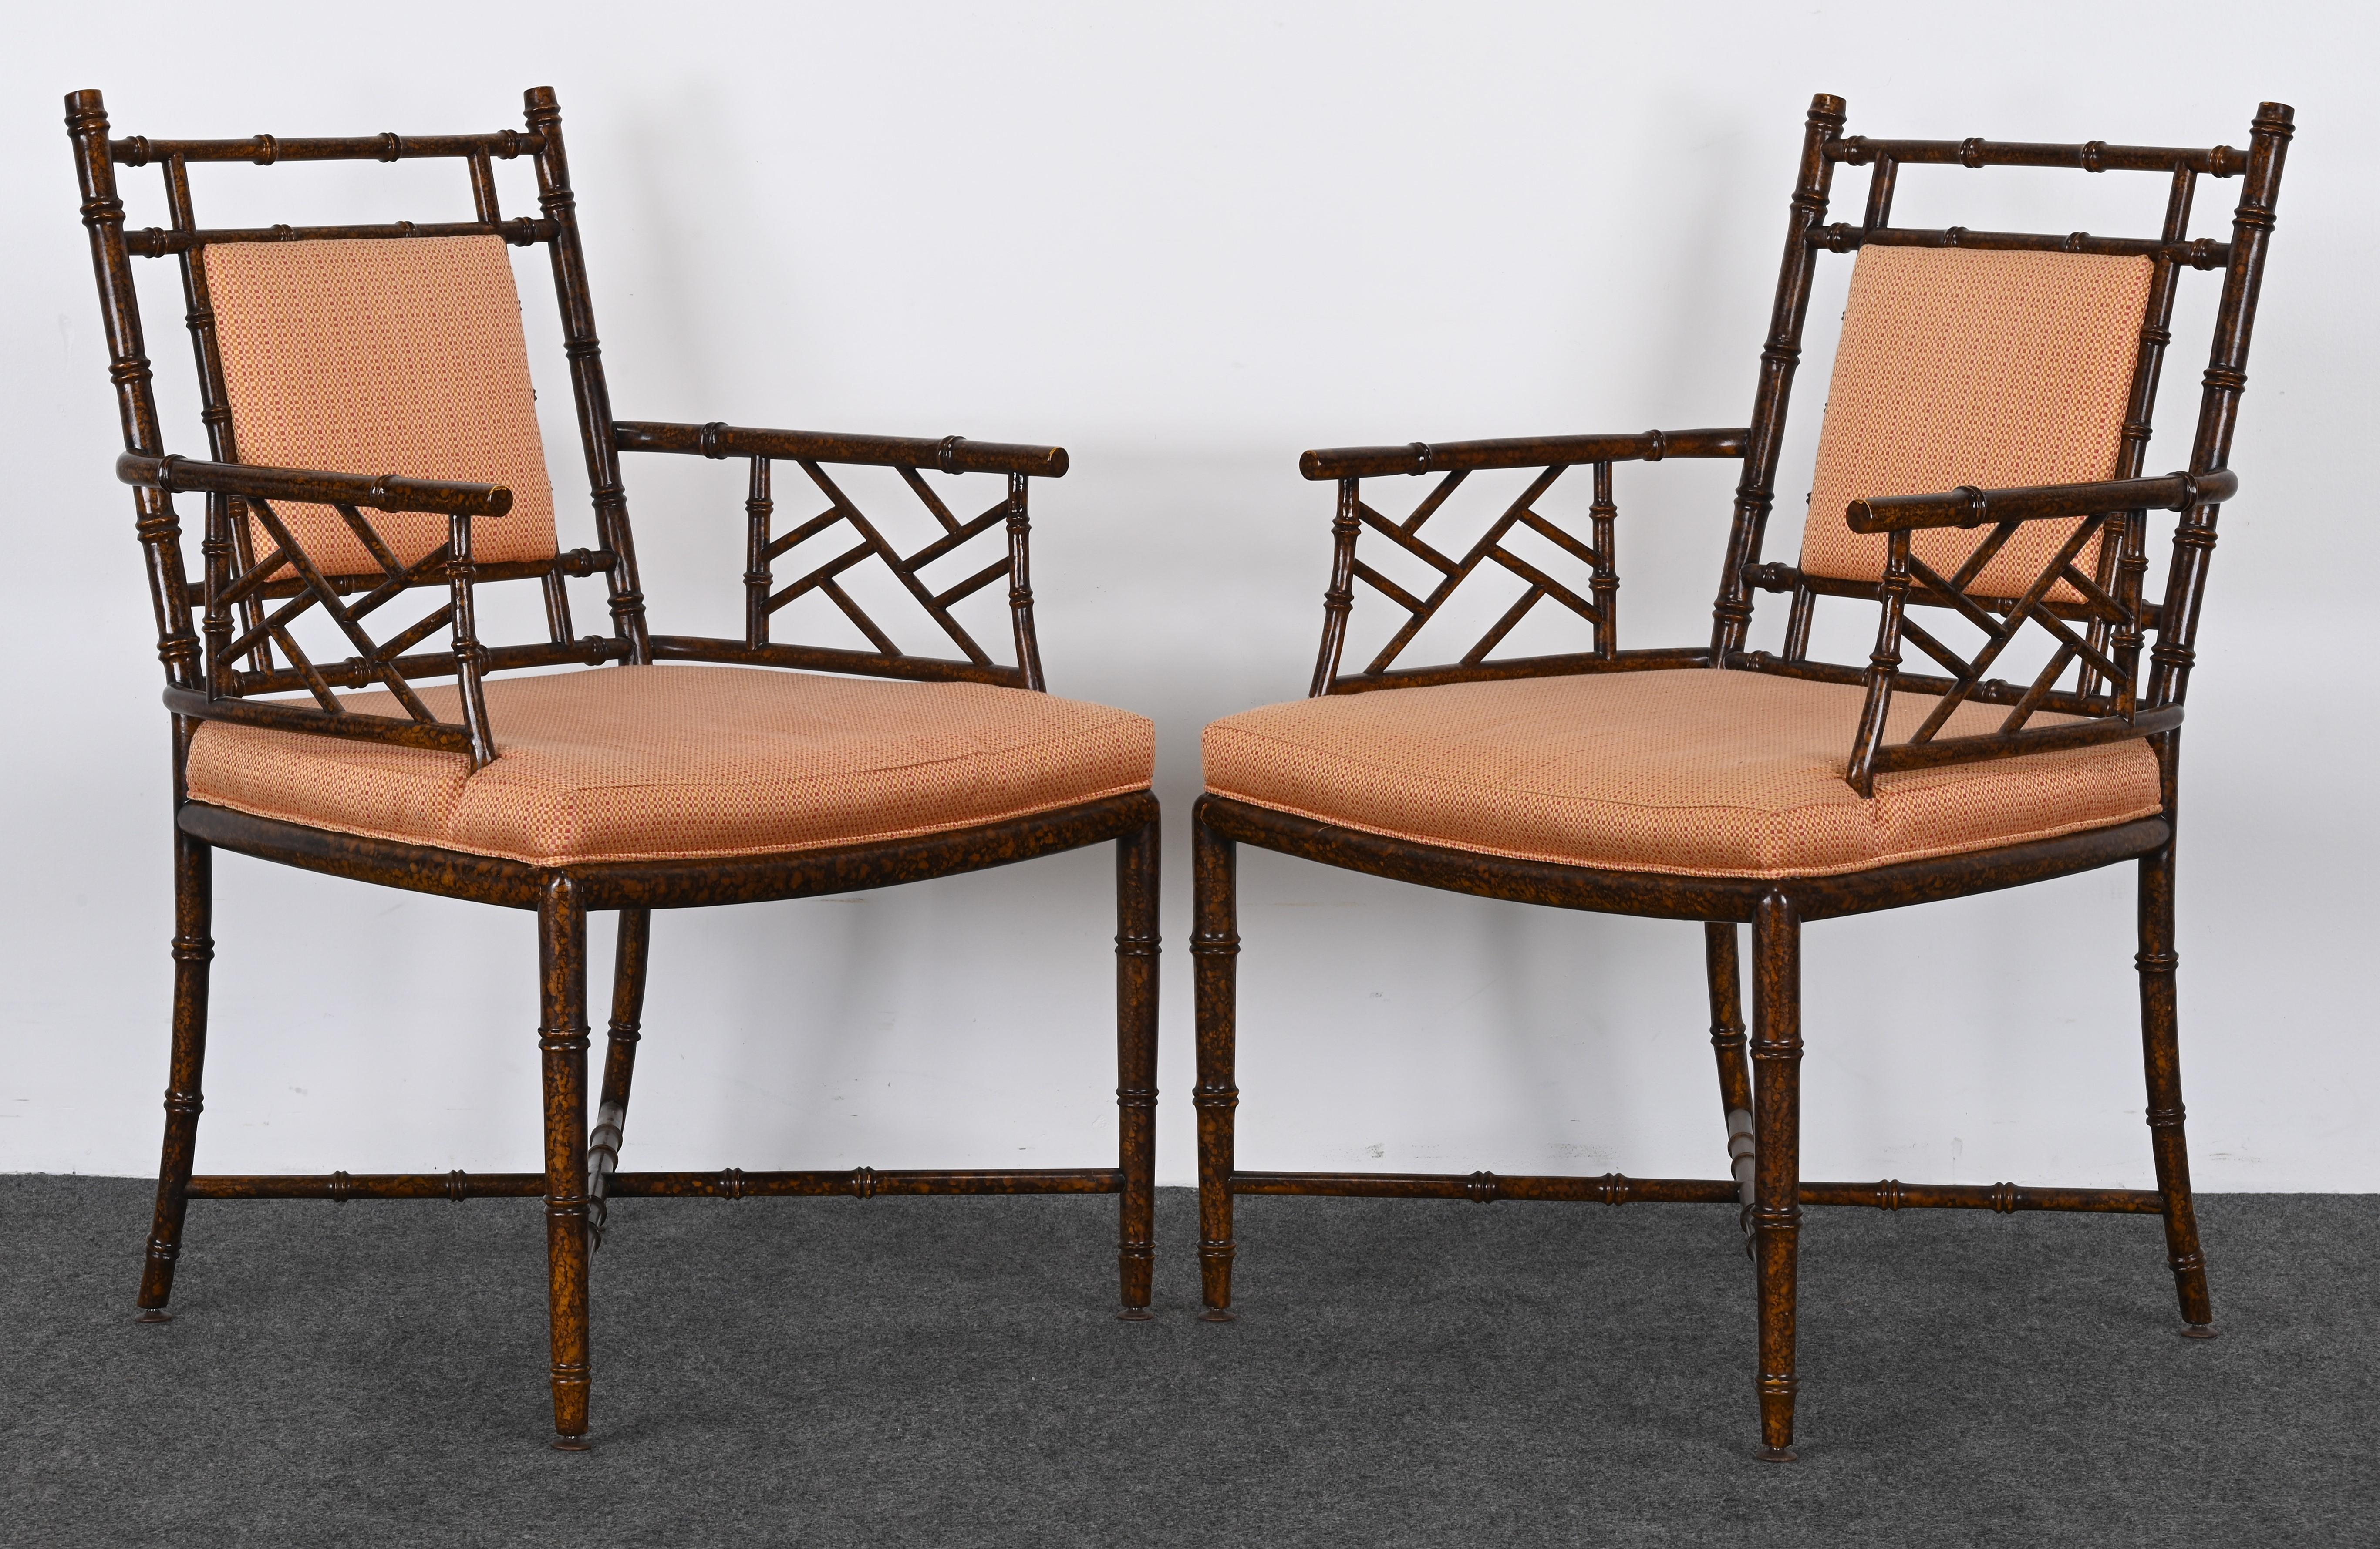 Lacquered Pair of Faux Bamboo Chairs by Pearson For Sale